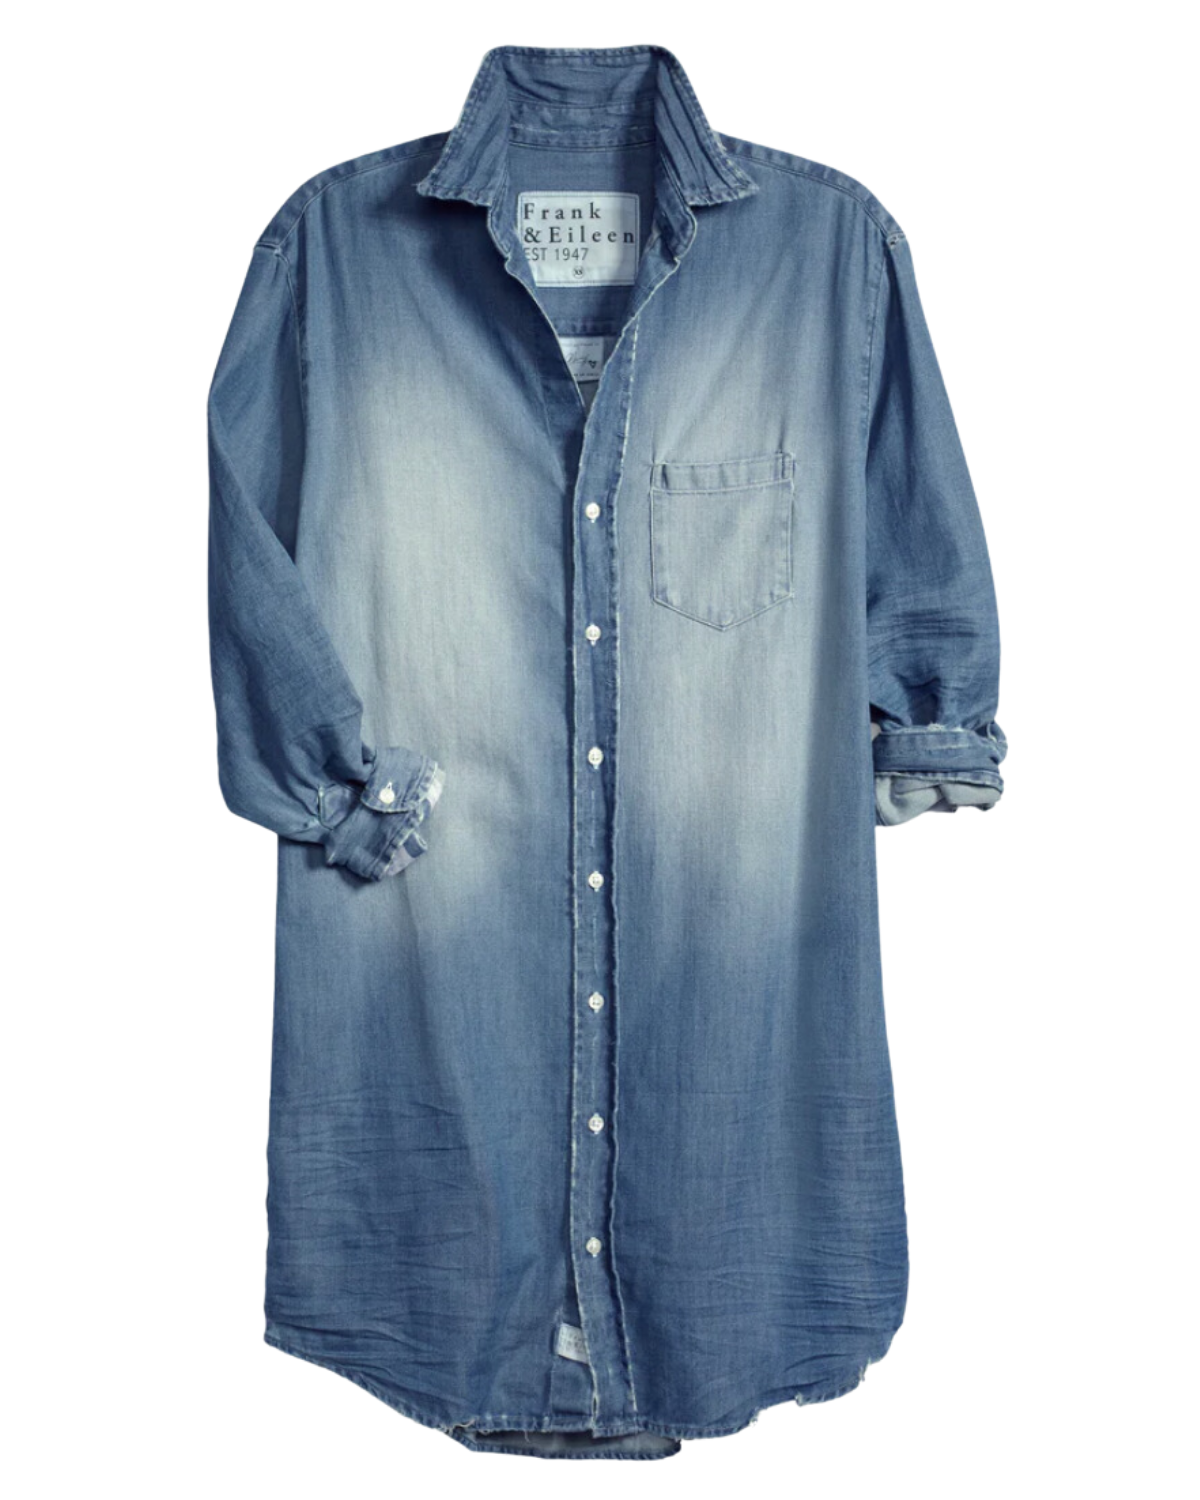 Mary Dress (Distressed Chambray)